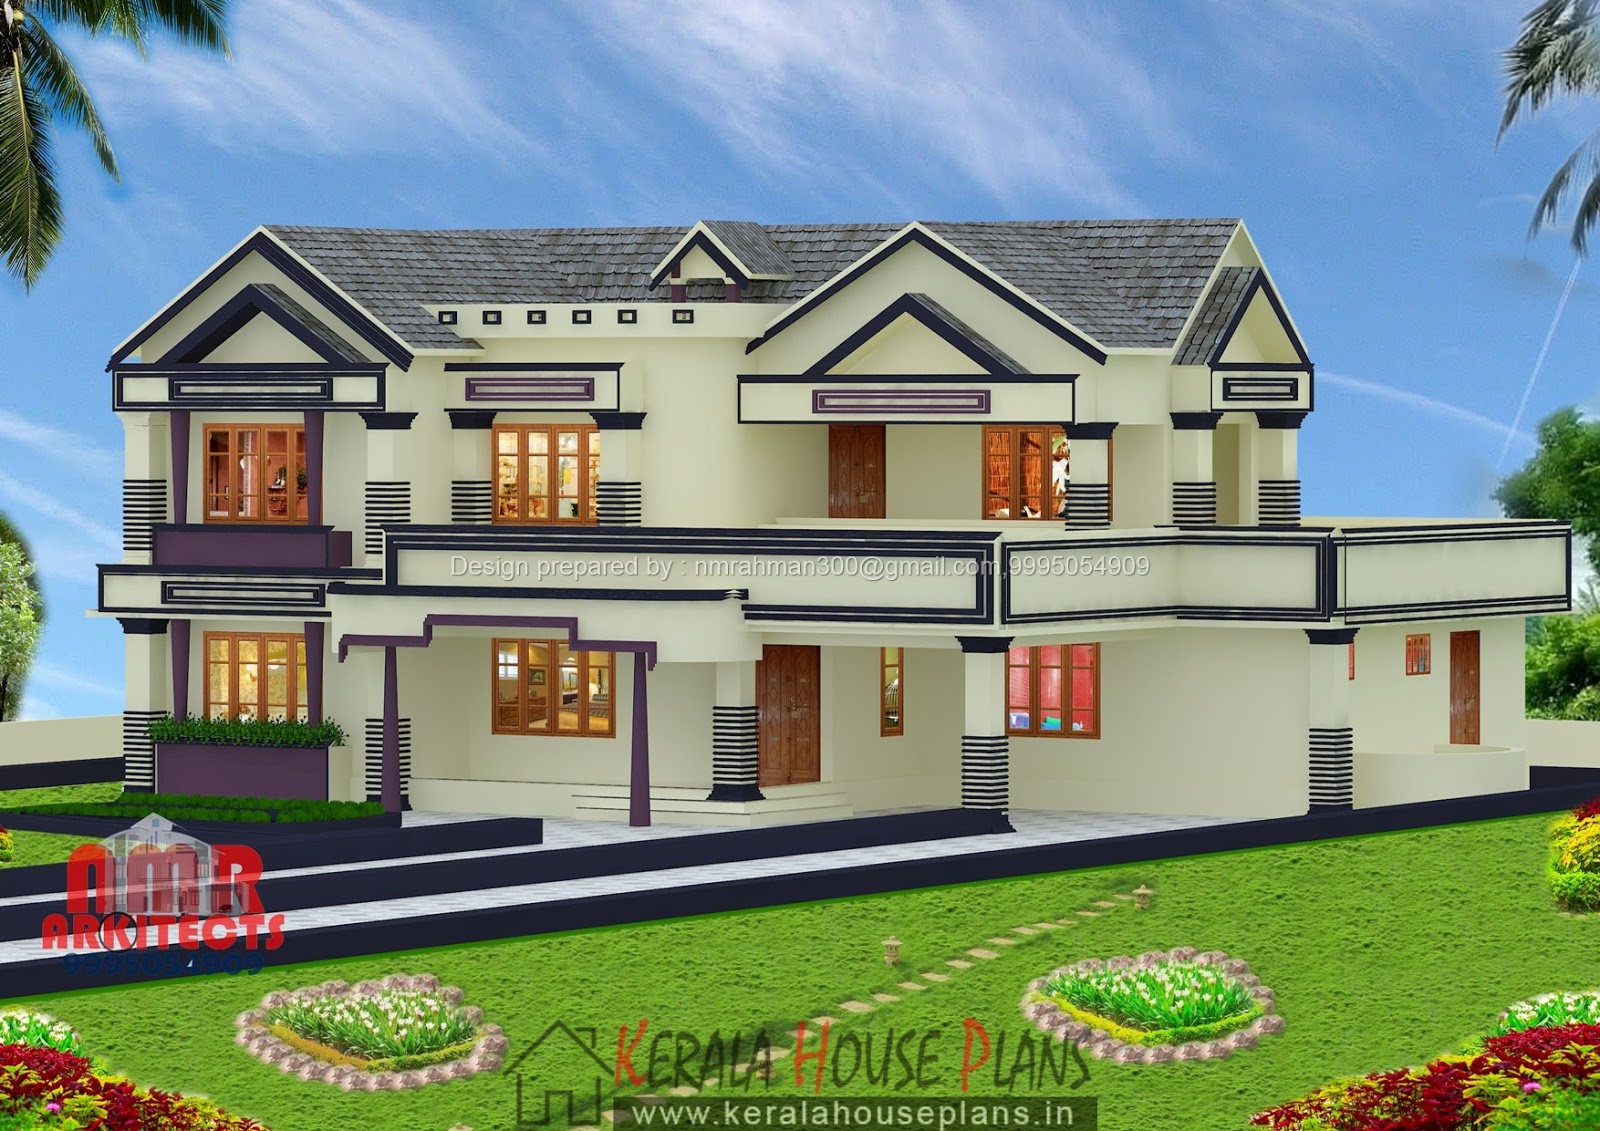 kerala house plans above 3000 sq ft